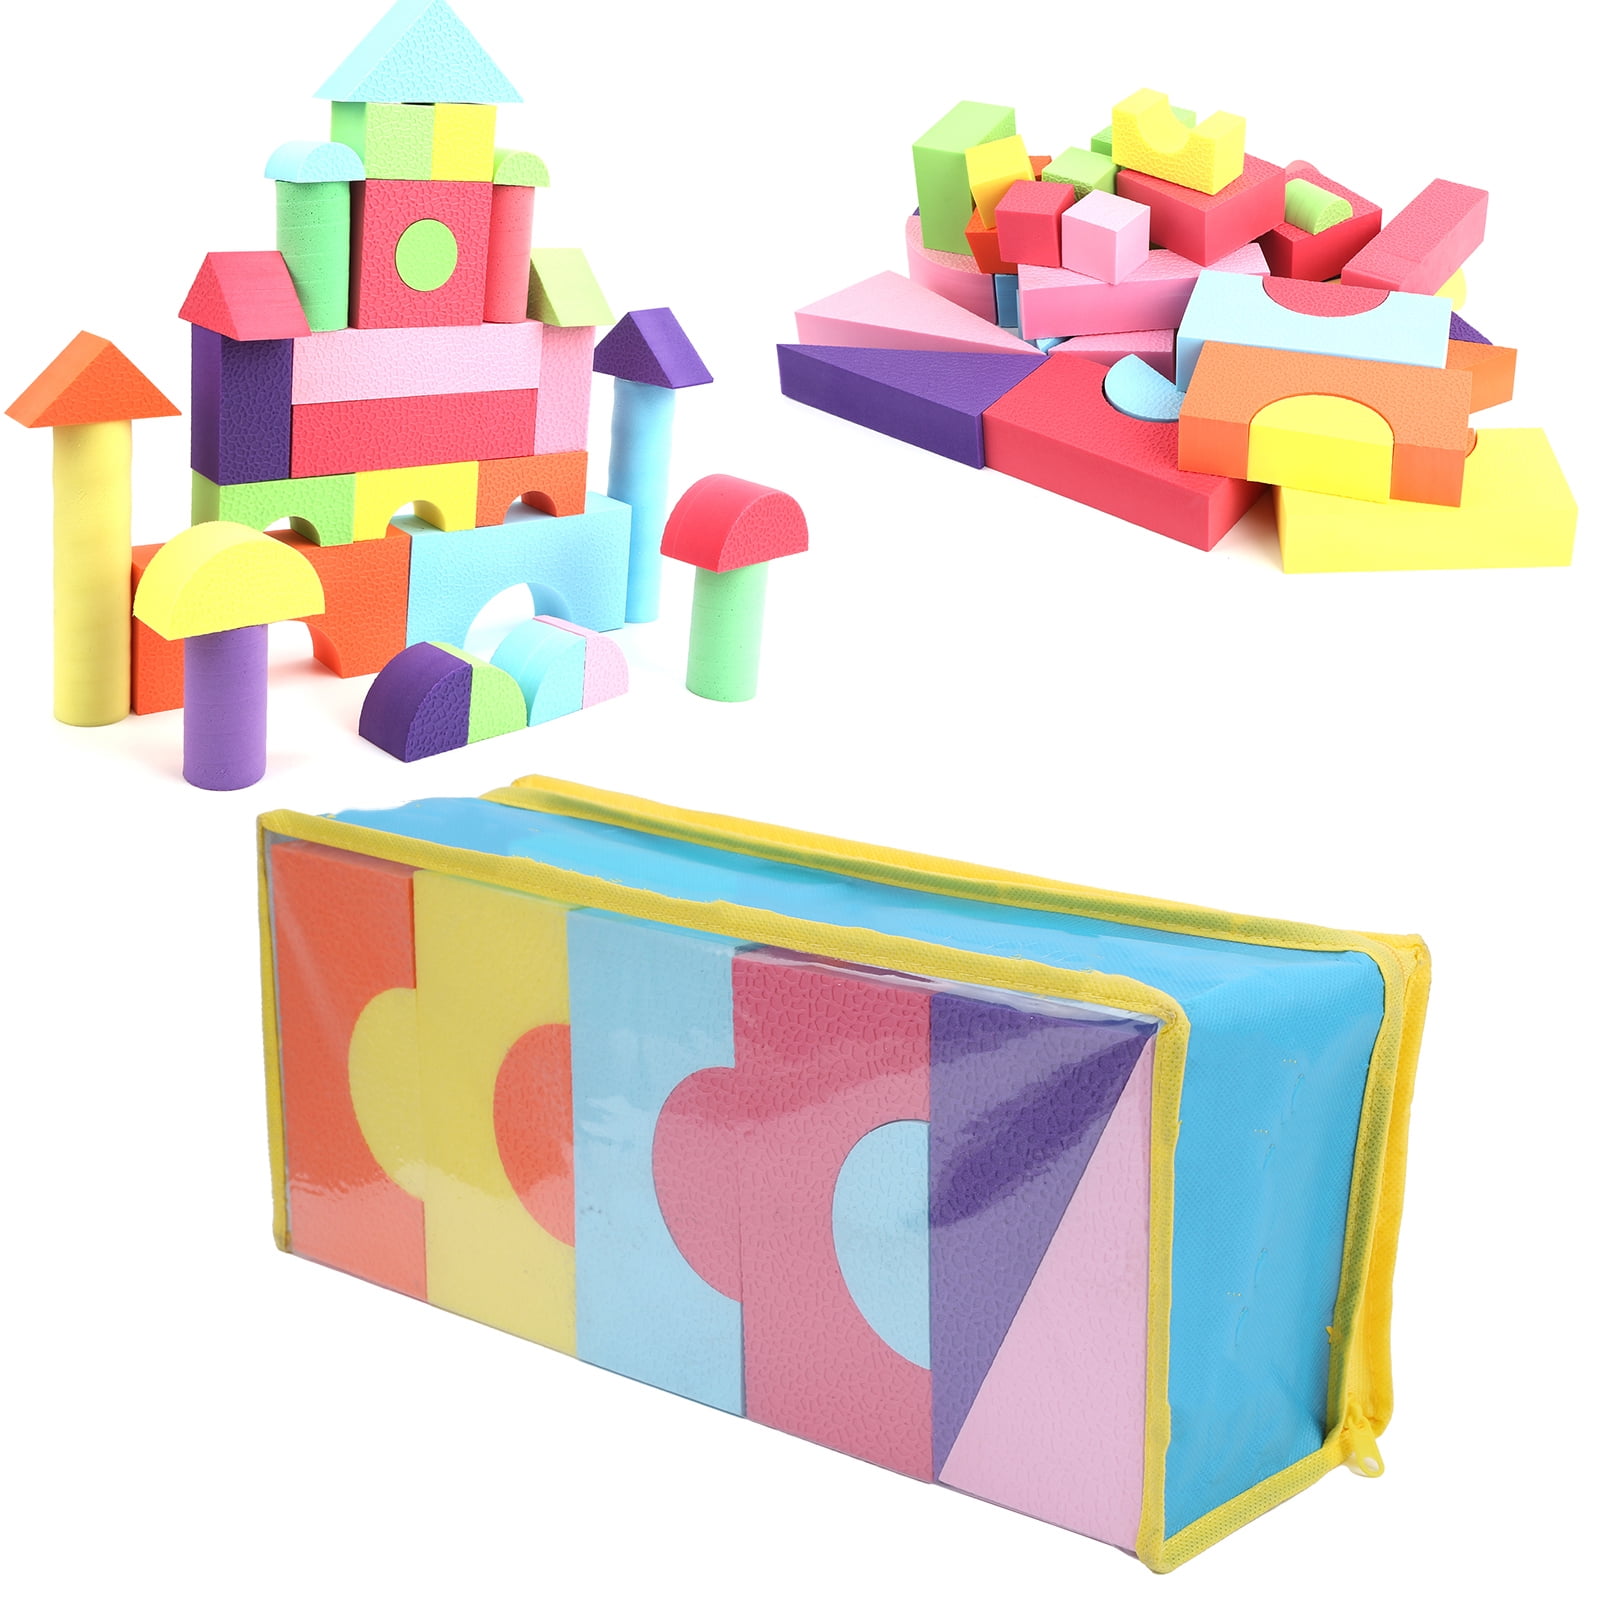 Best Choice Products 4-Piece Kids Climb & Crawl Soft Foam Block Playset Structures for Child Development - Multicolor